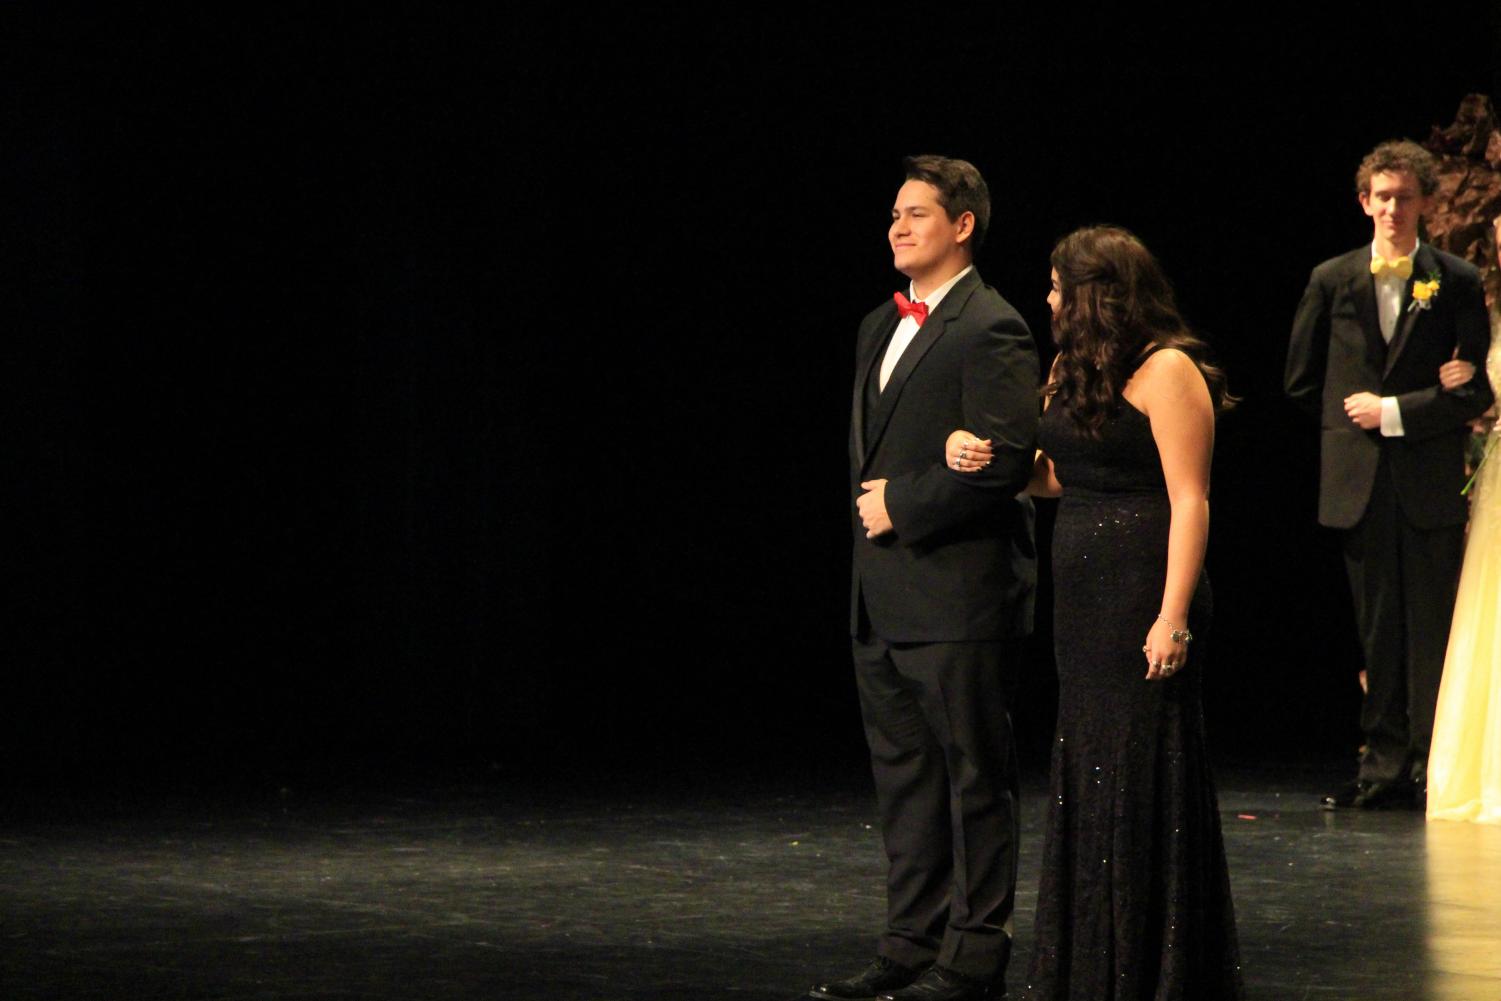 Senior Jonah Flores escorts senior Haylee Haxton across the stage. Haxton was nominated as a candidate for queen at coronation.